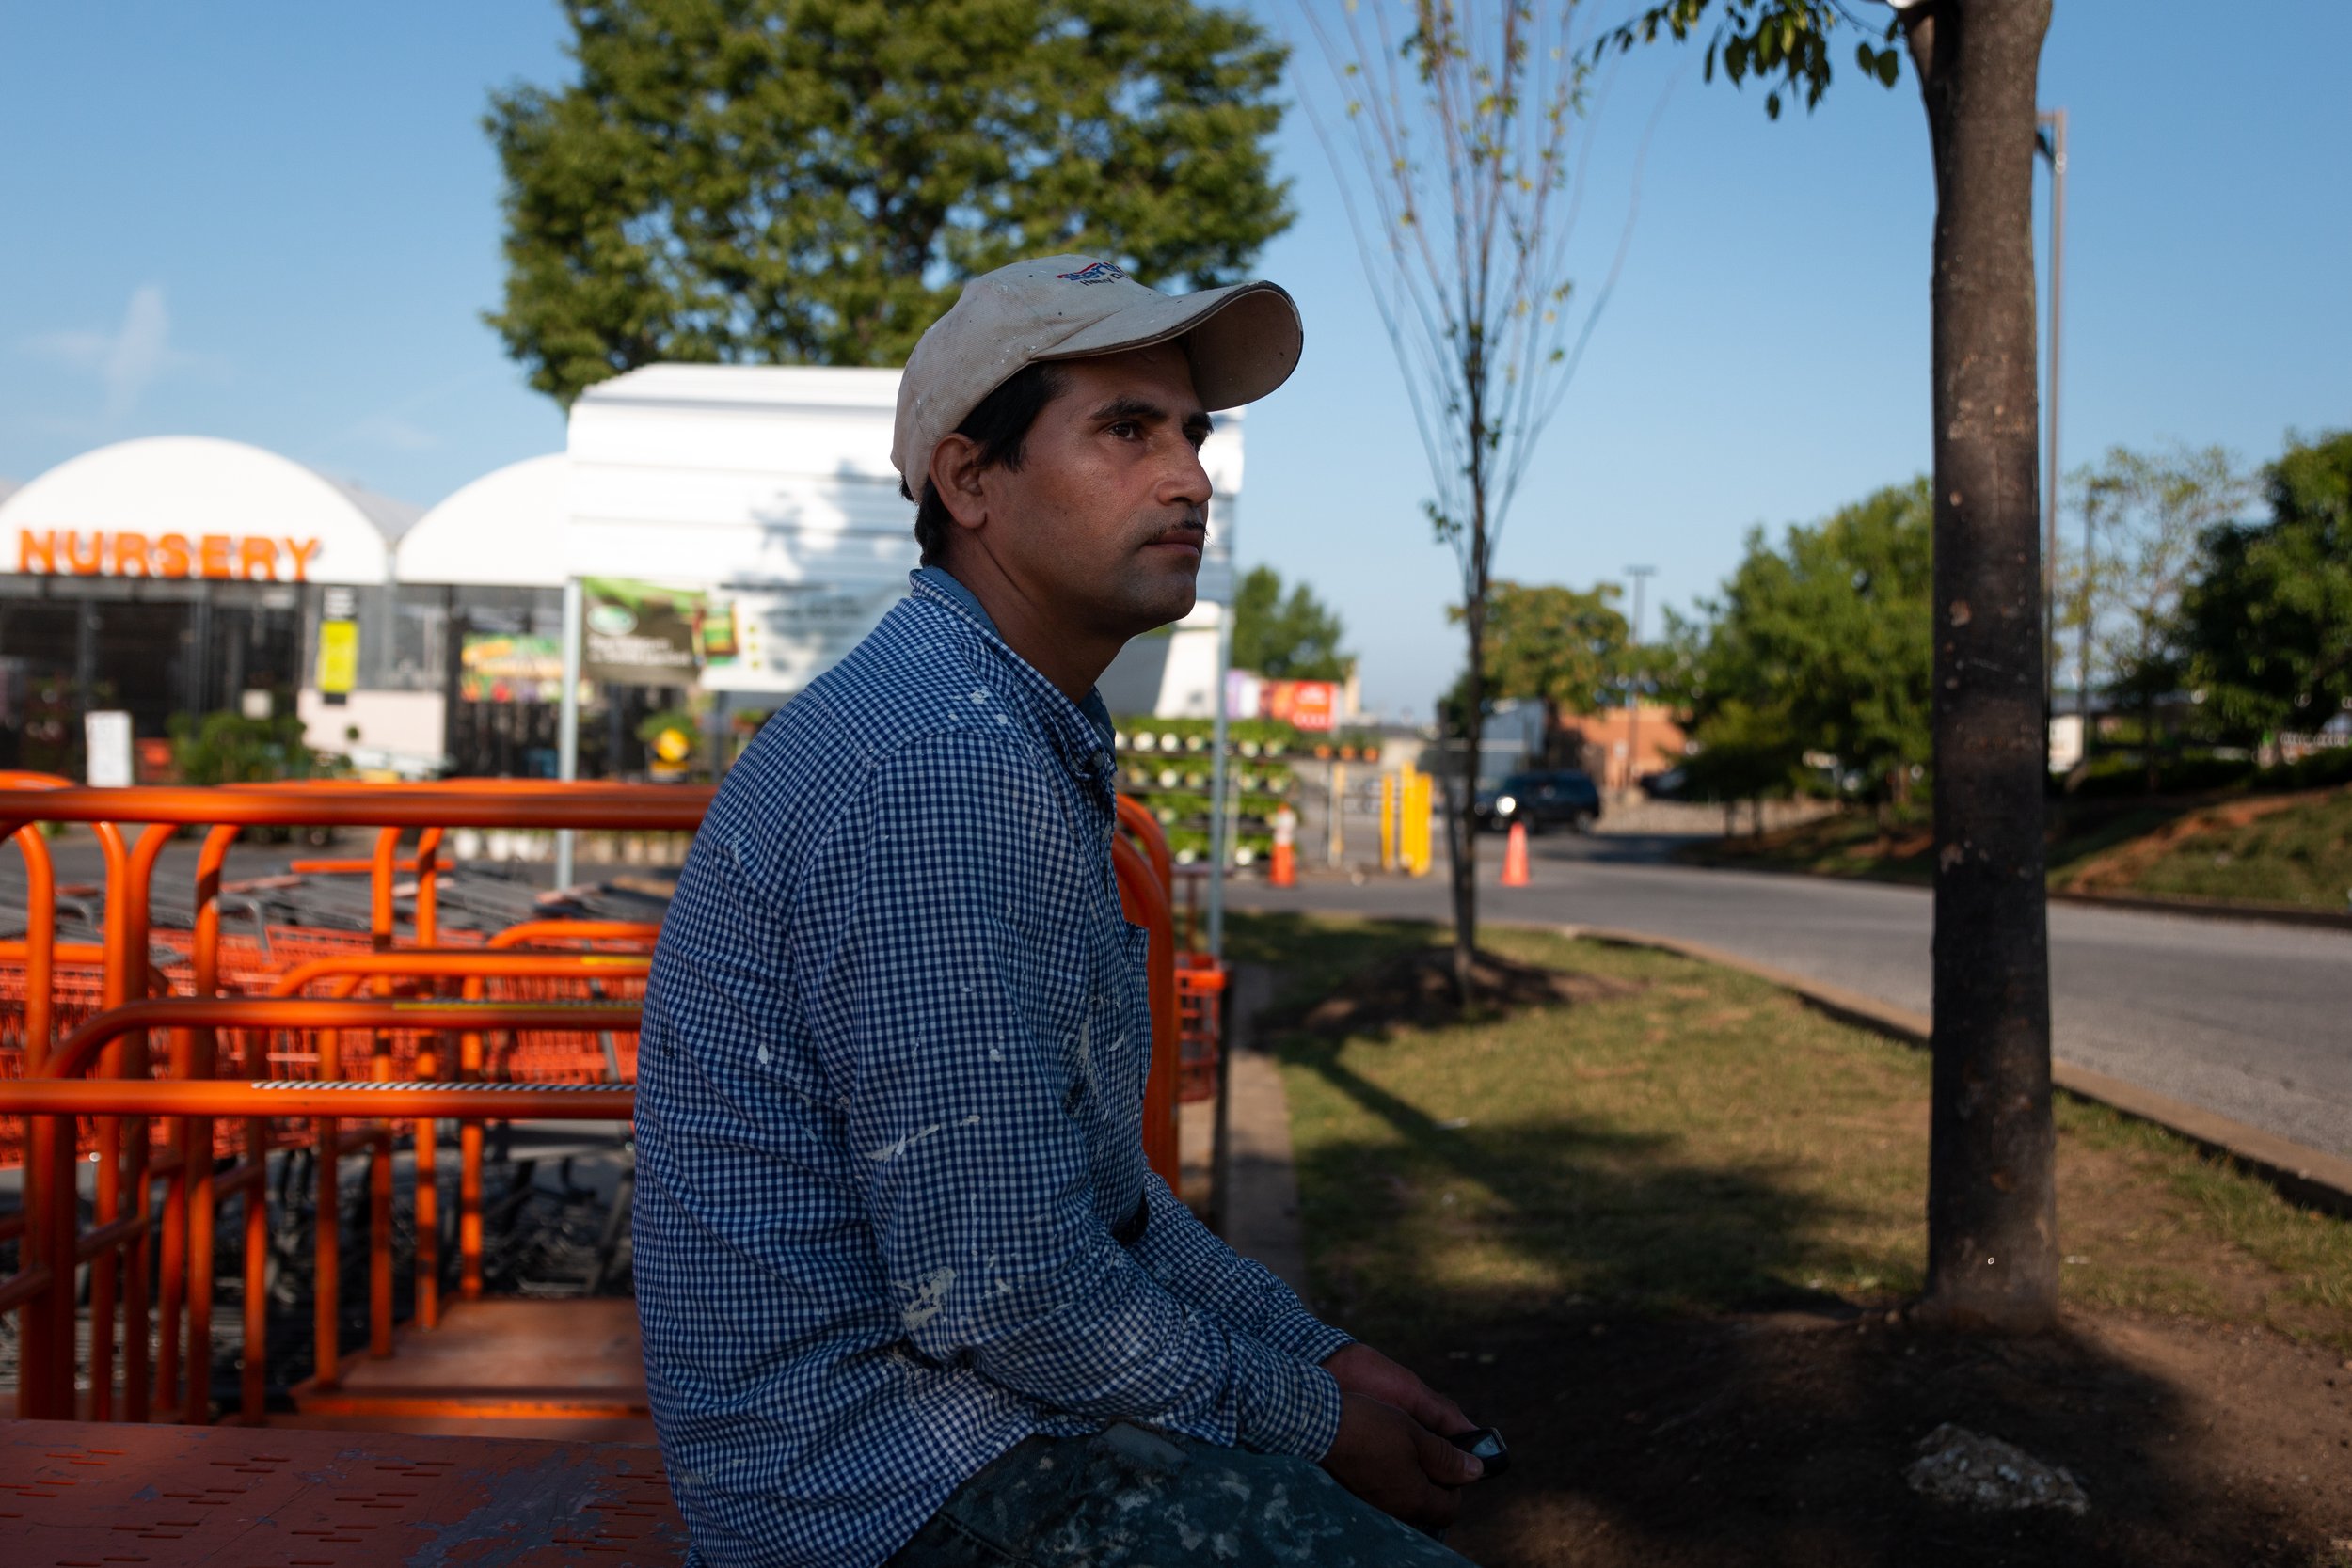  Adolfo Lazaro, was one of few day laborers who ventured out looking for work as the expectation of mass raids cast concern that kept many inside their homes. The Guatemalan father of six fled violence in his home country and is seeking asylum in the